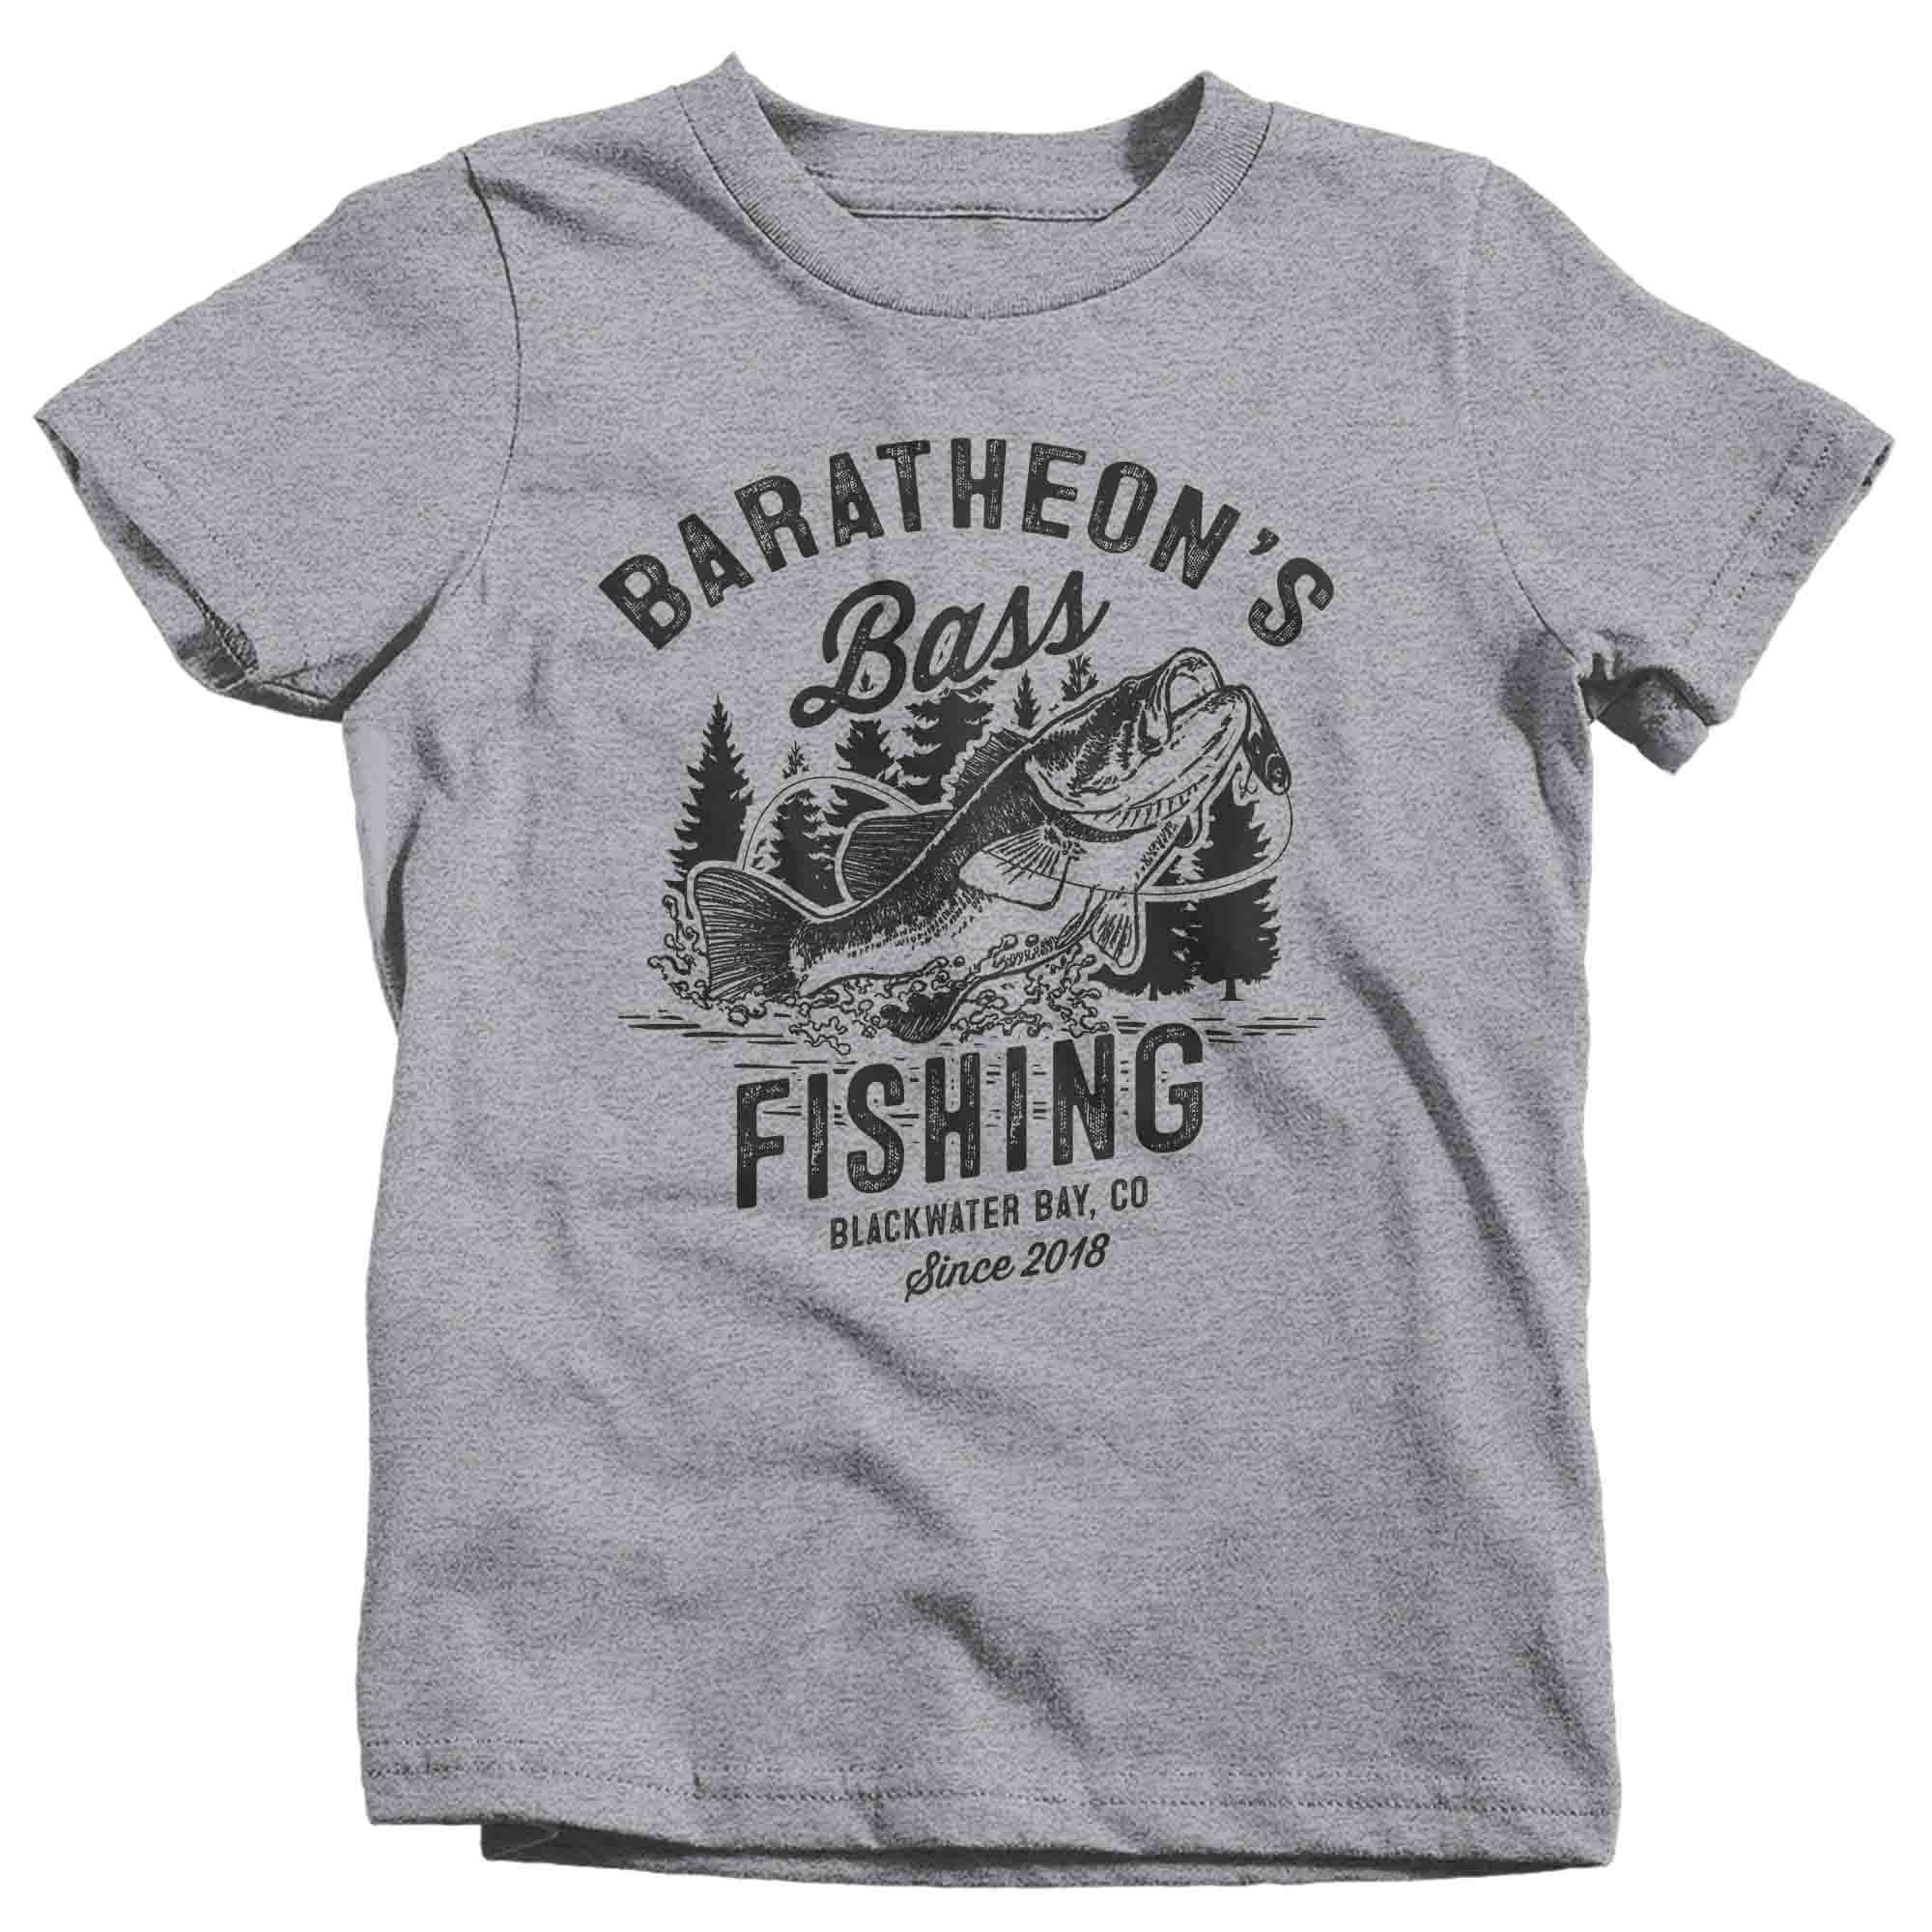 GusseaK Boys' Fishing Shirt: This Young Angler Adores Fishing - Perfect Gift!, Kids Unisex, Size: 3XL, Black